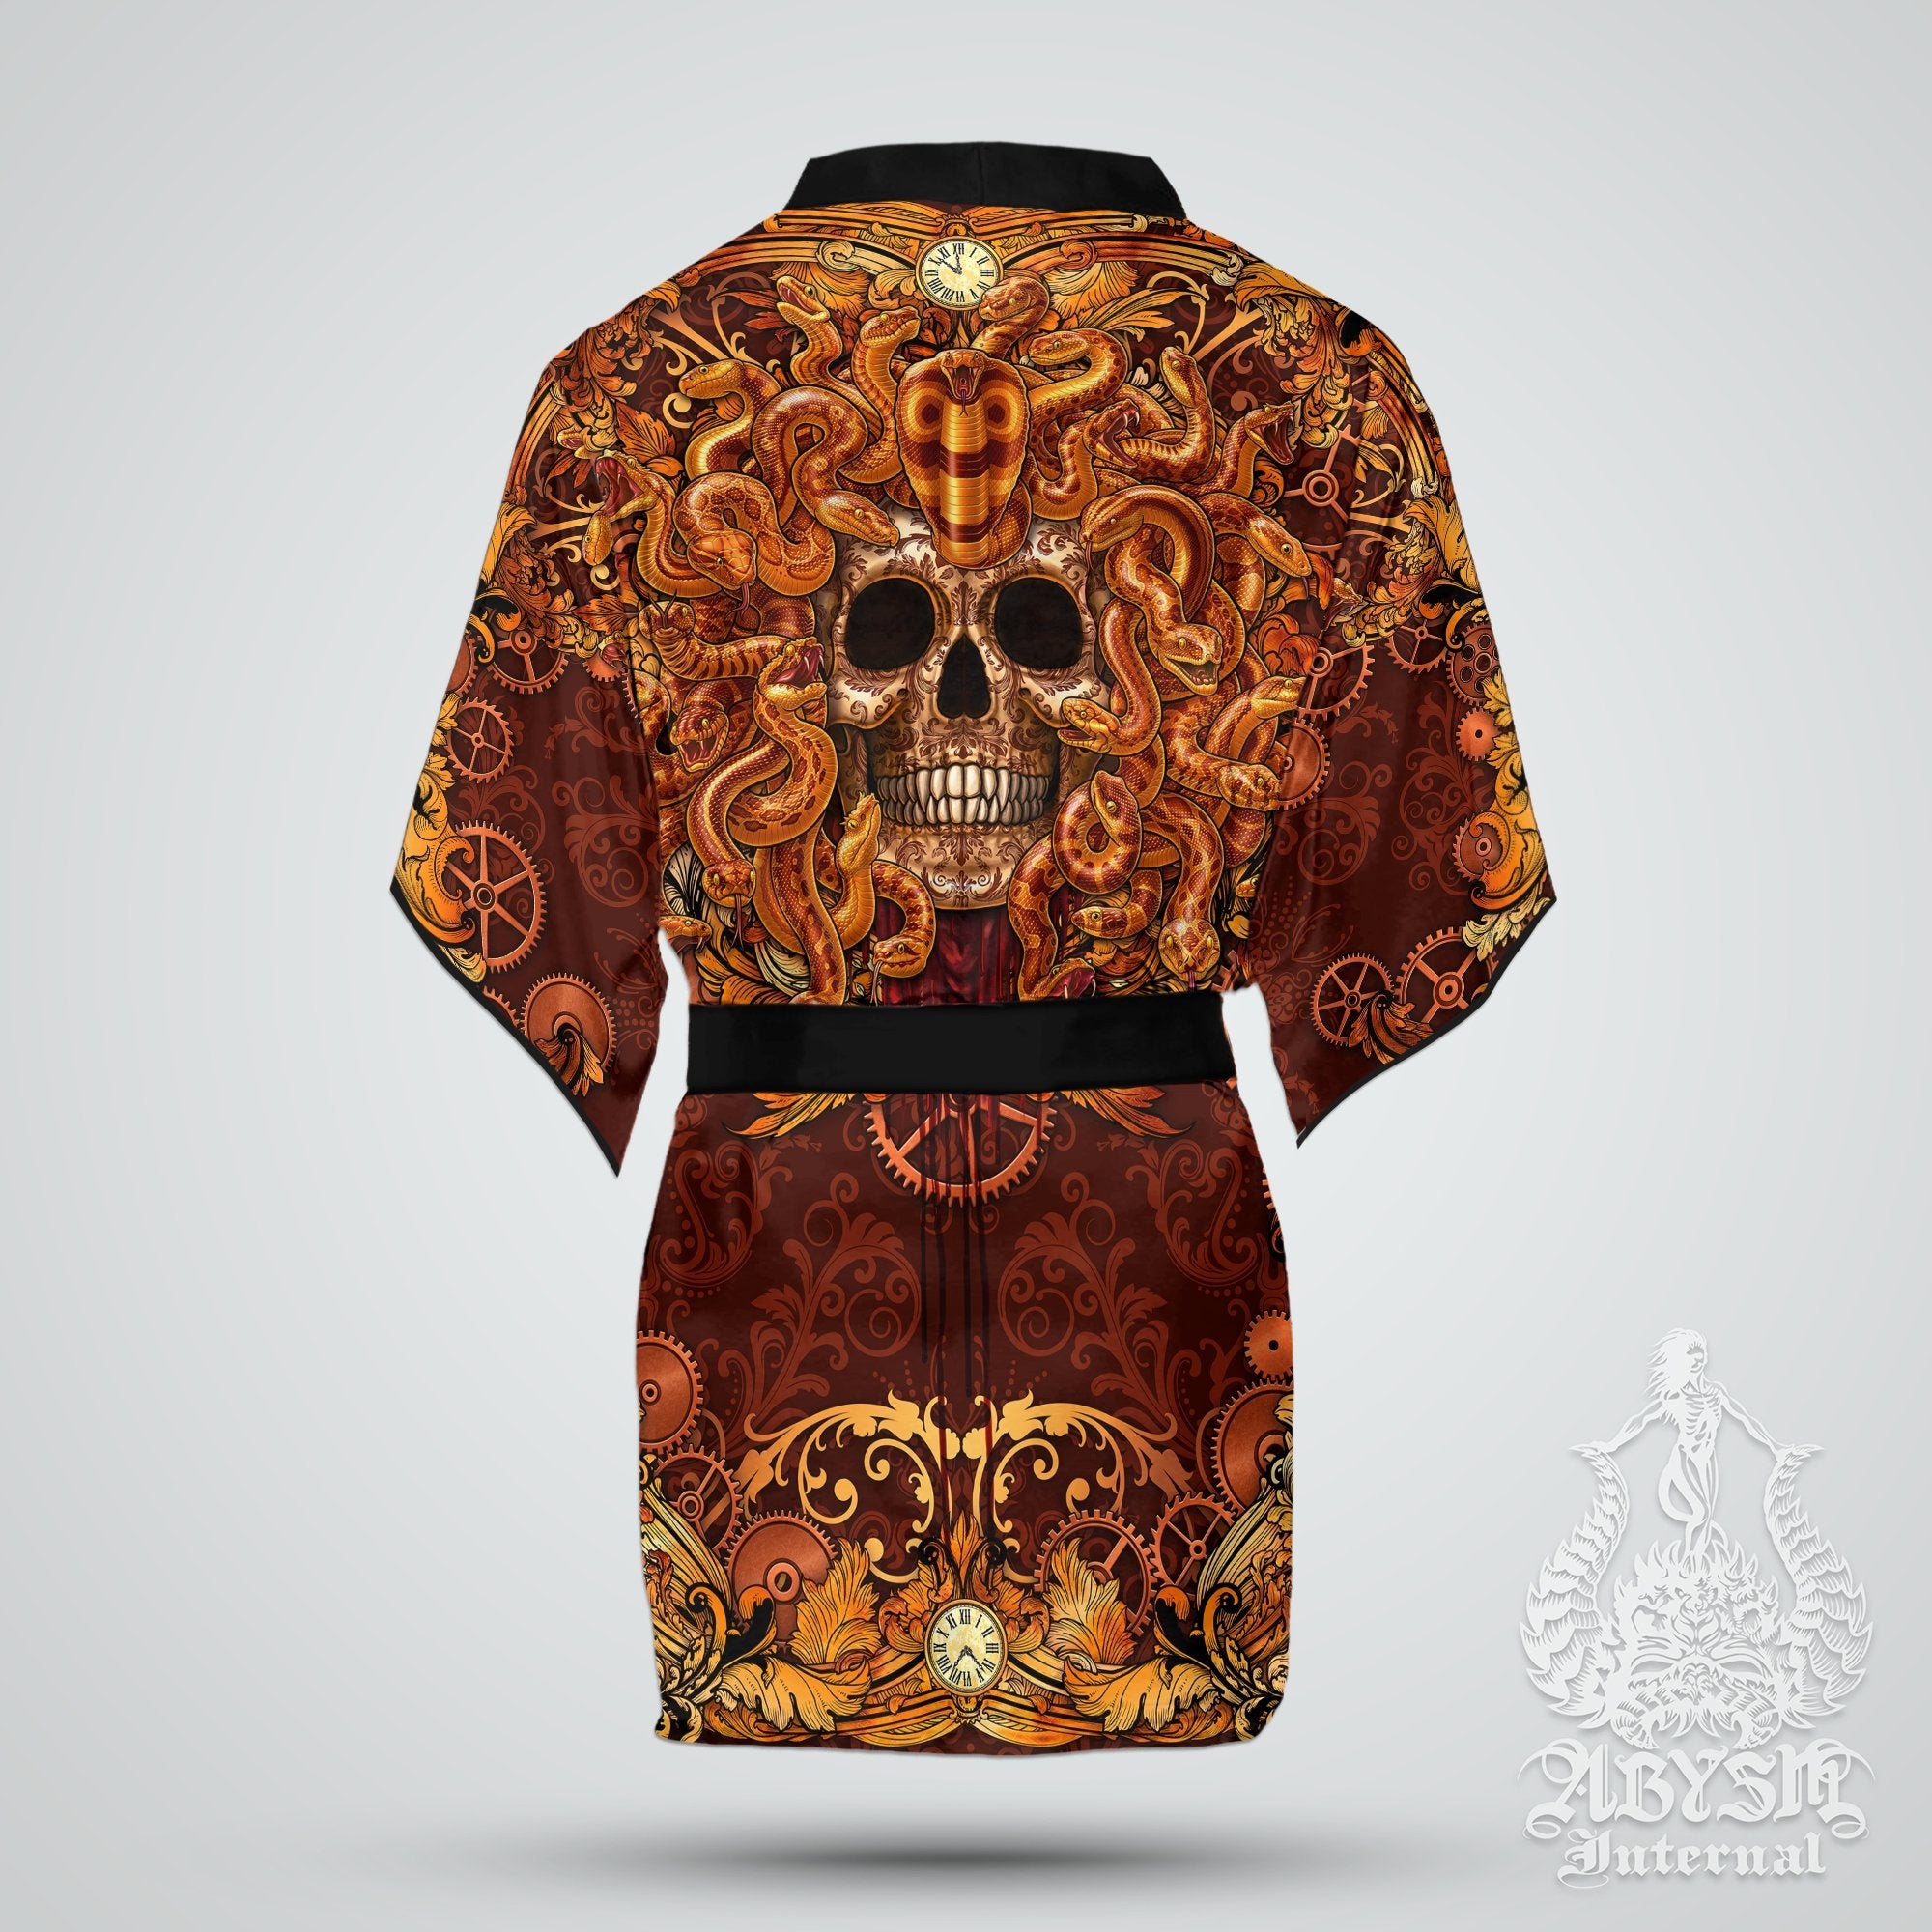 Medusa Skull Cover Up, Beach Outfit, Party Kimono, Summer Festival Robe, Indie and Alternative Clothing, Unisex - Steampunk - Abysm Internal